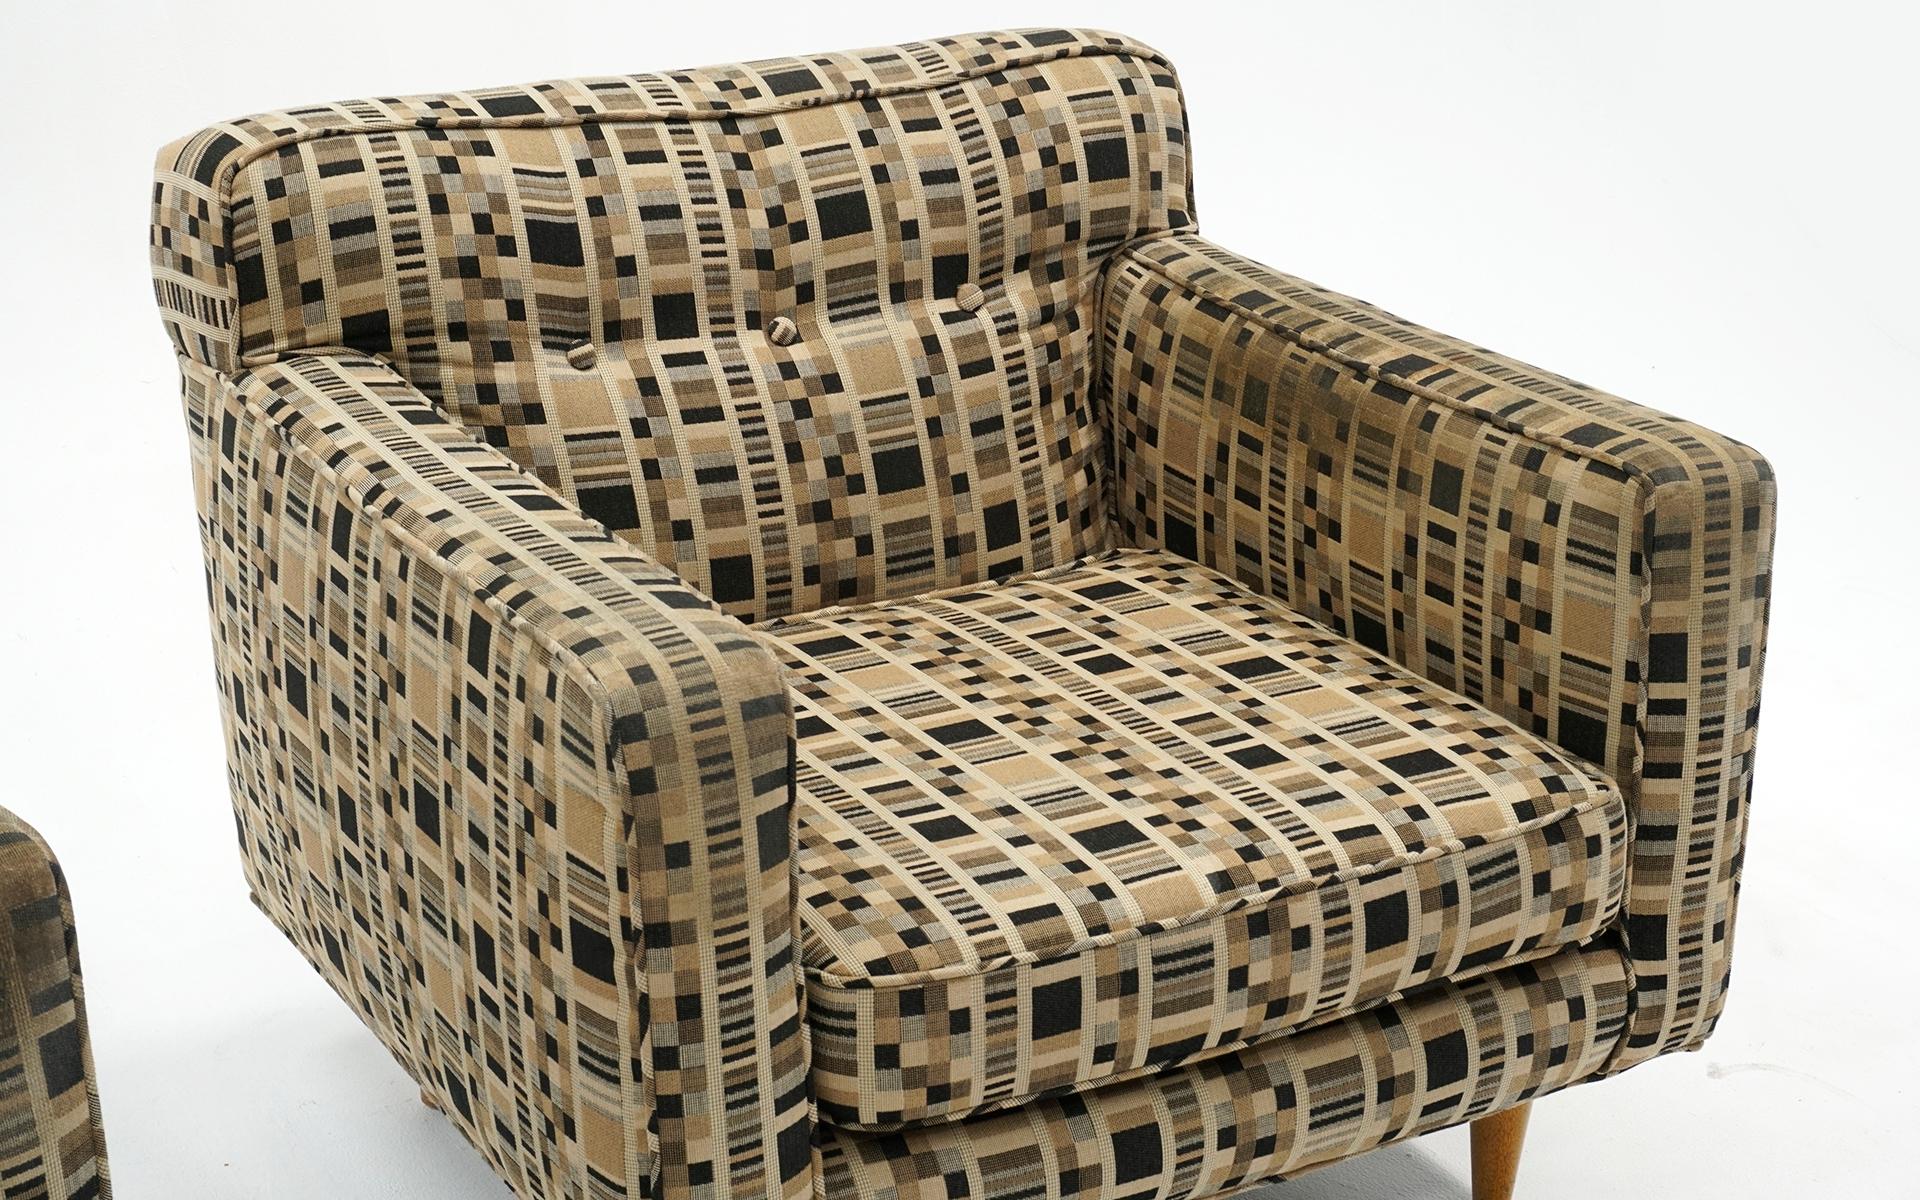 Bleached Pair of Lounge Chairs by Edward Wormley for Dunbar, Priced for Reupholstery